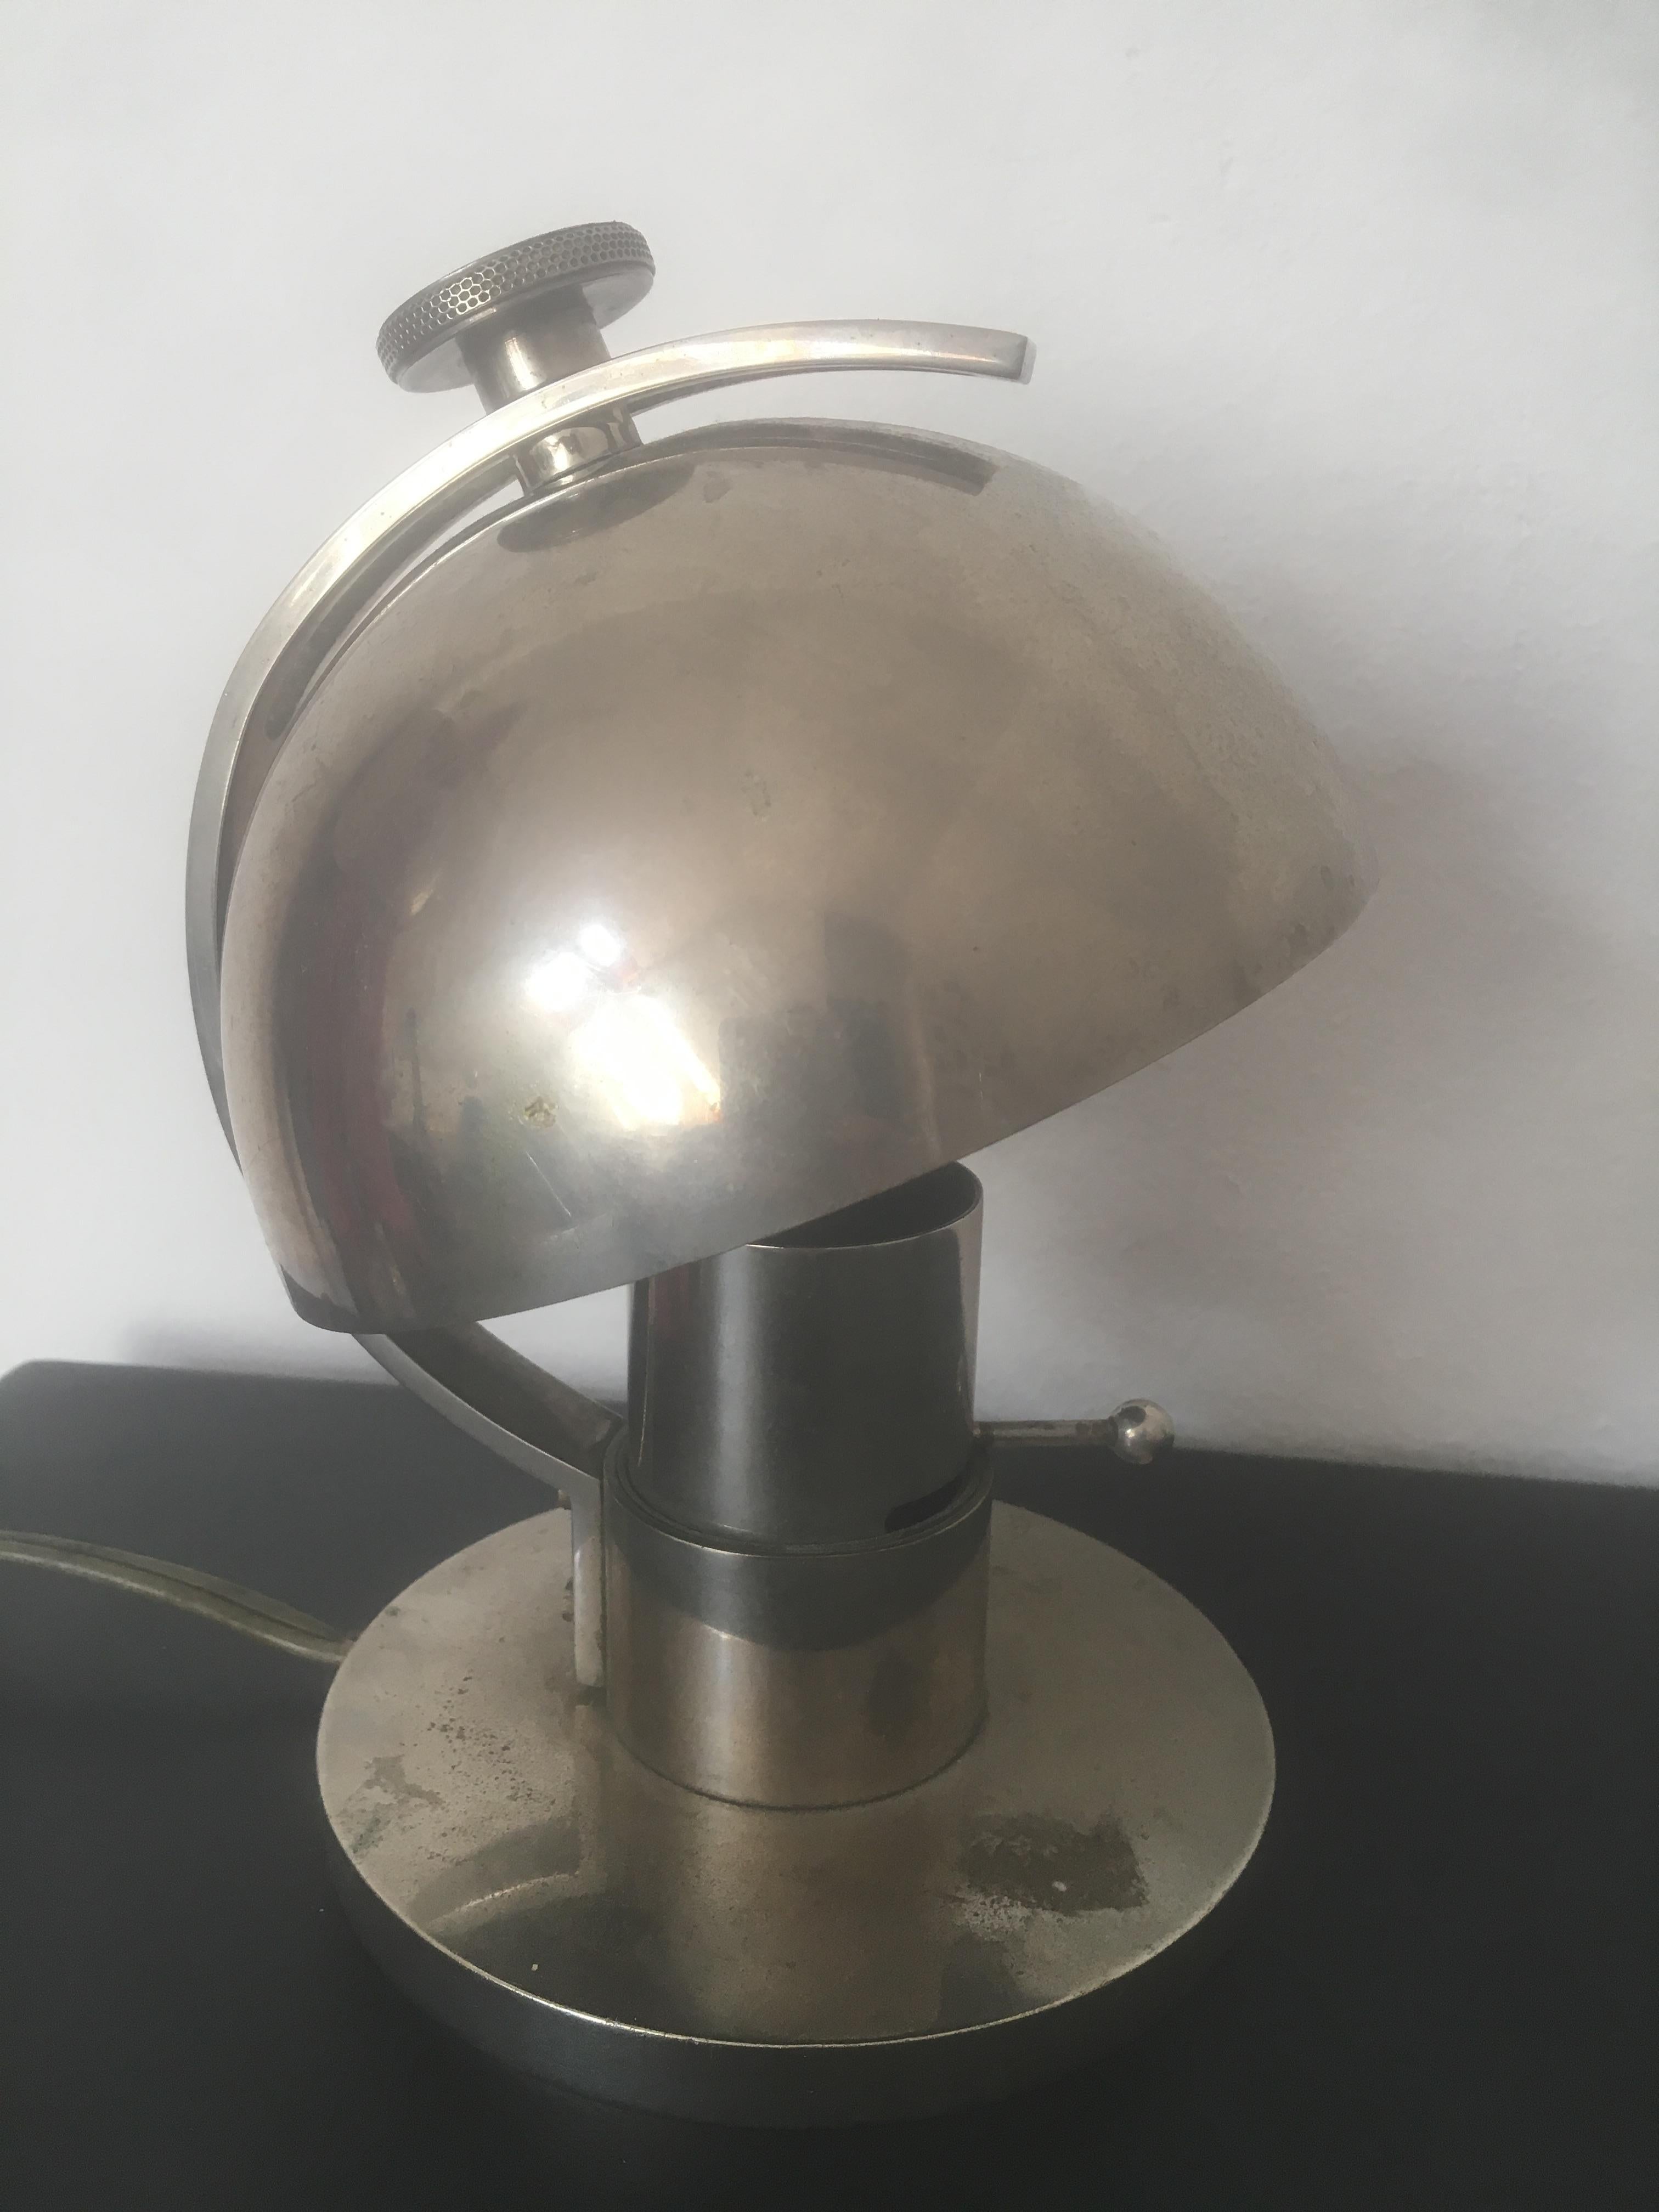 An Art Deco nickeled metal table lamp designed by Maison Desny in France in 1930s. A very modernist design with its adjustable metal lampshade and a bar as an on/off switch.
It comes from an important Art Deco lighting collection and has not been